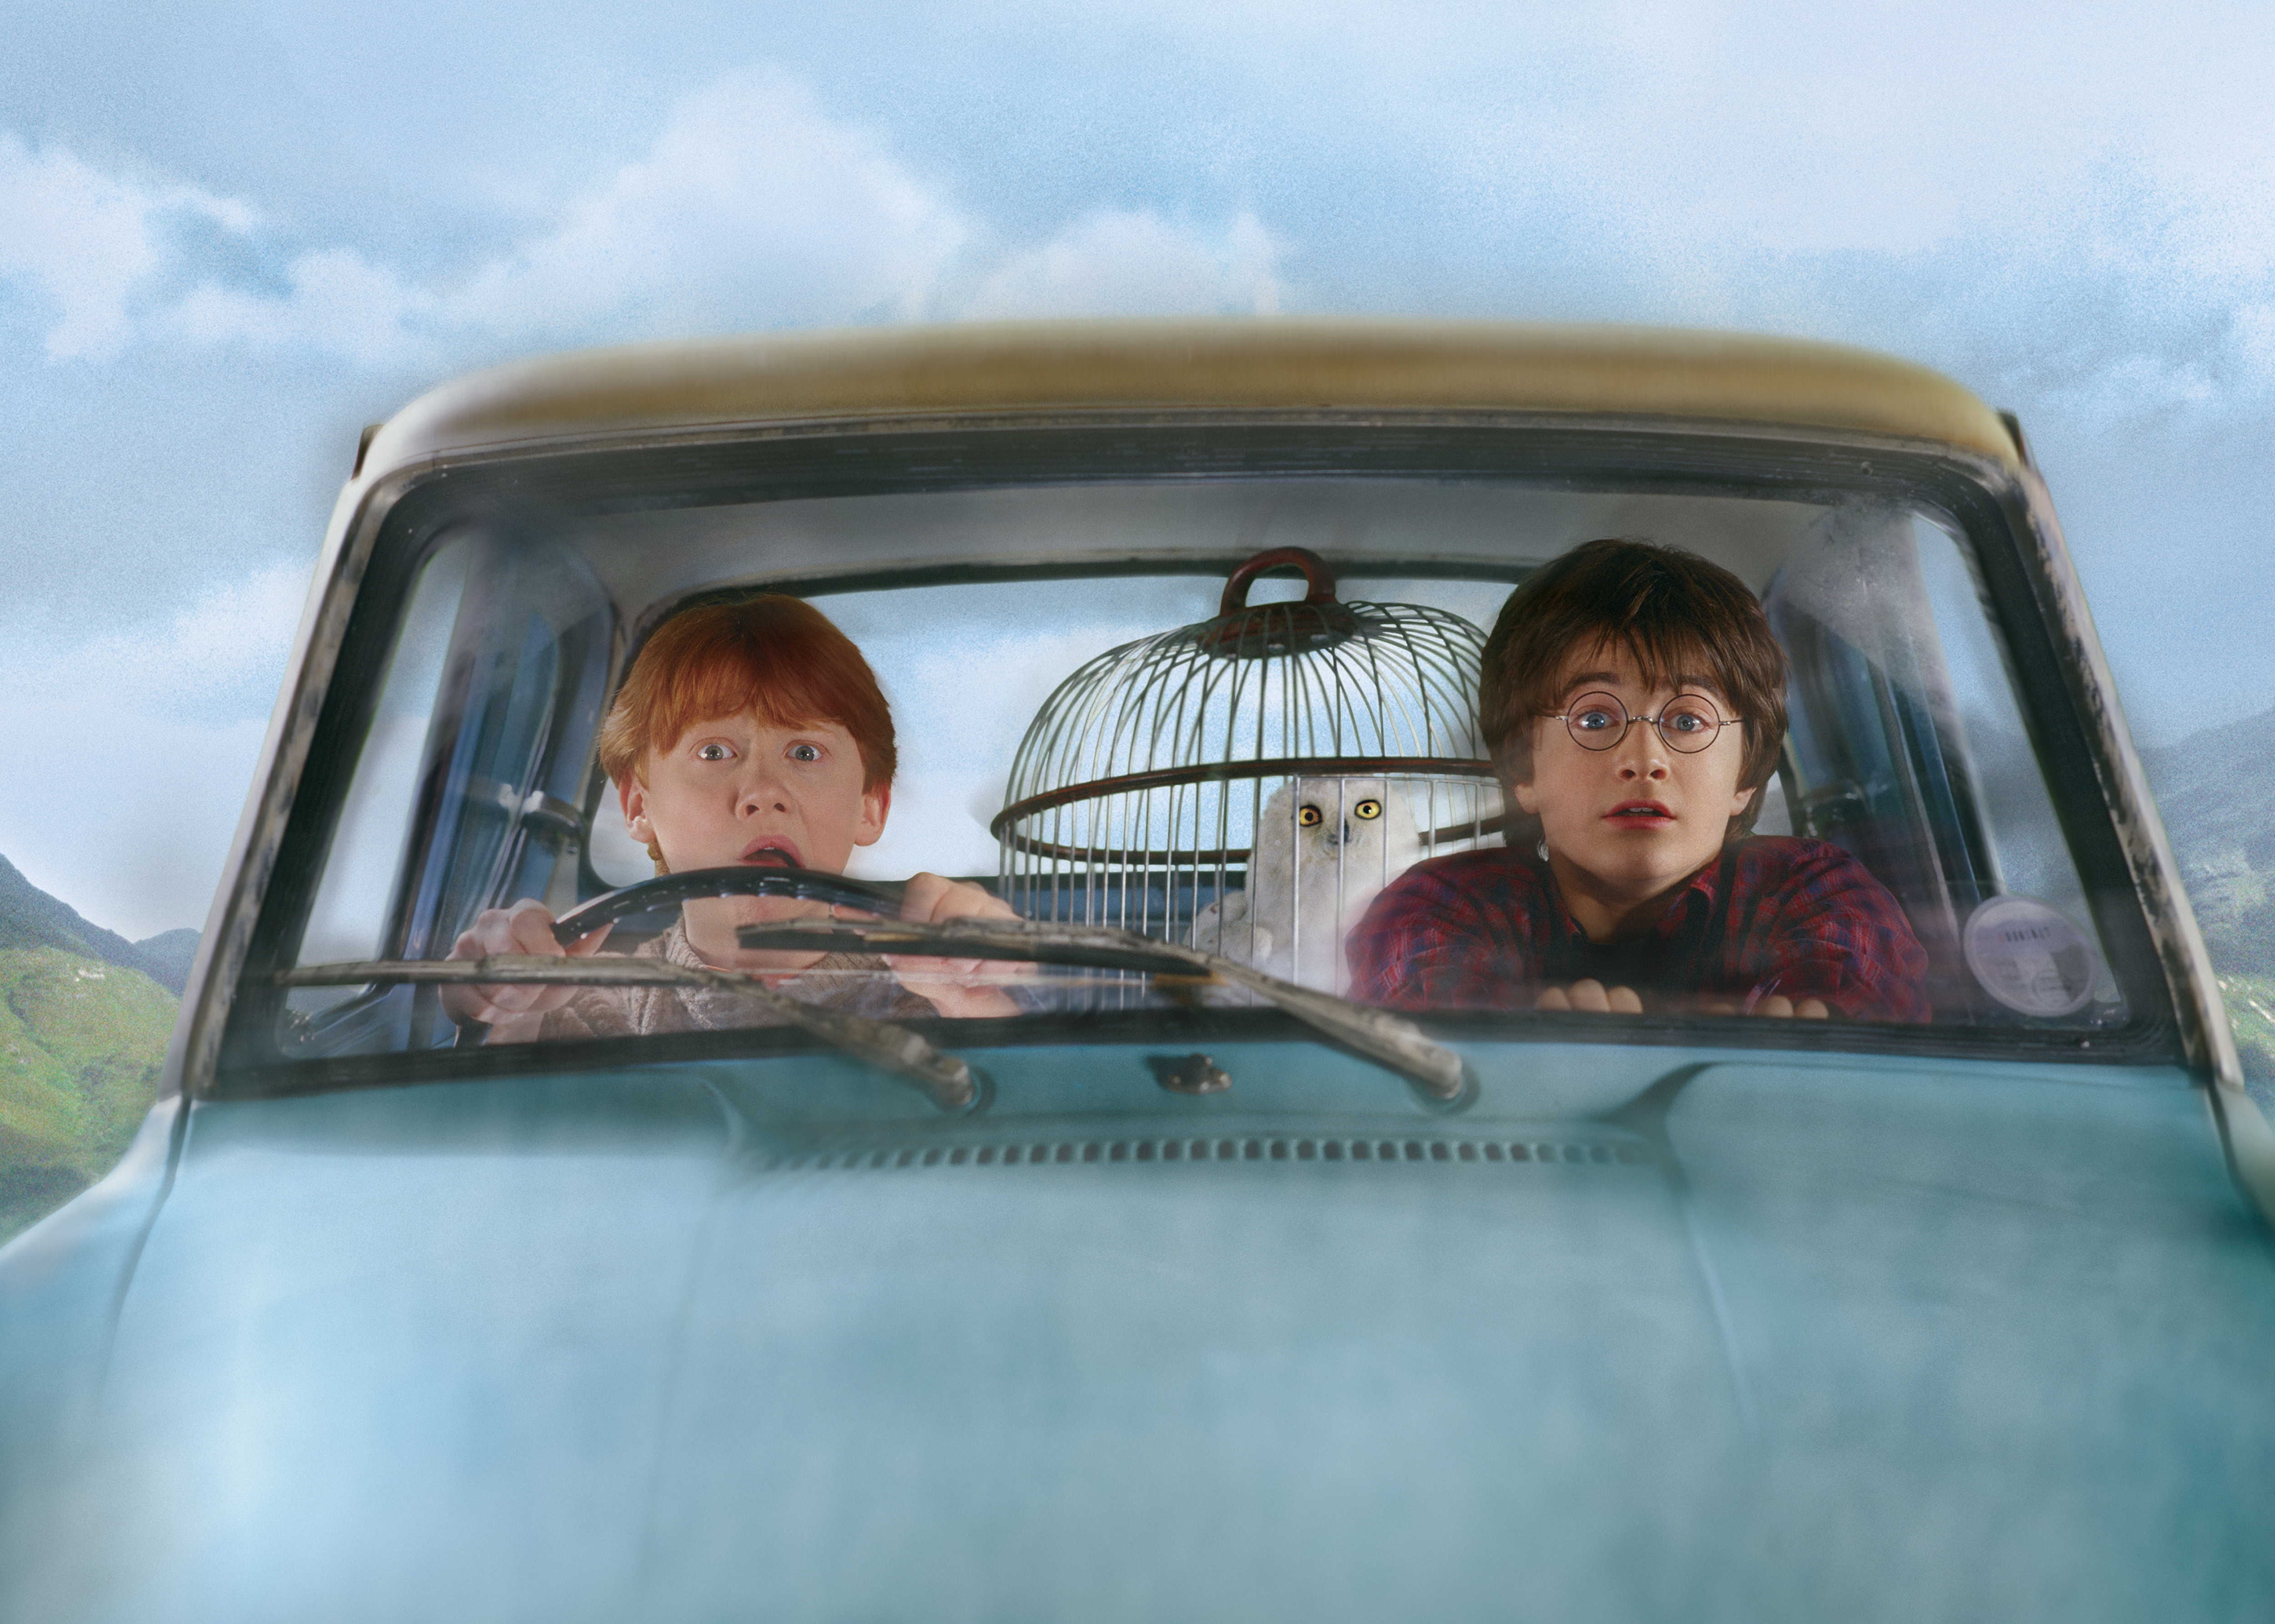 In Harry Potter and the Chamber of Secrets, you can see that Ron's